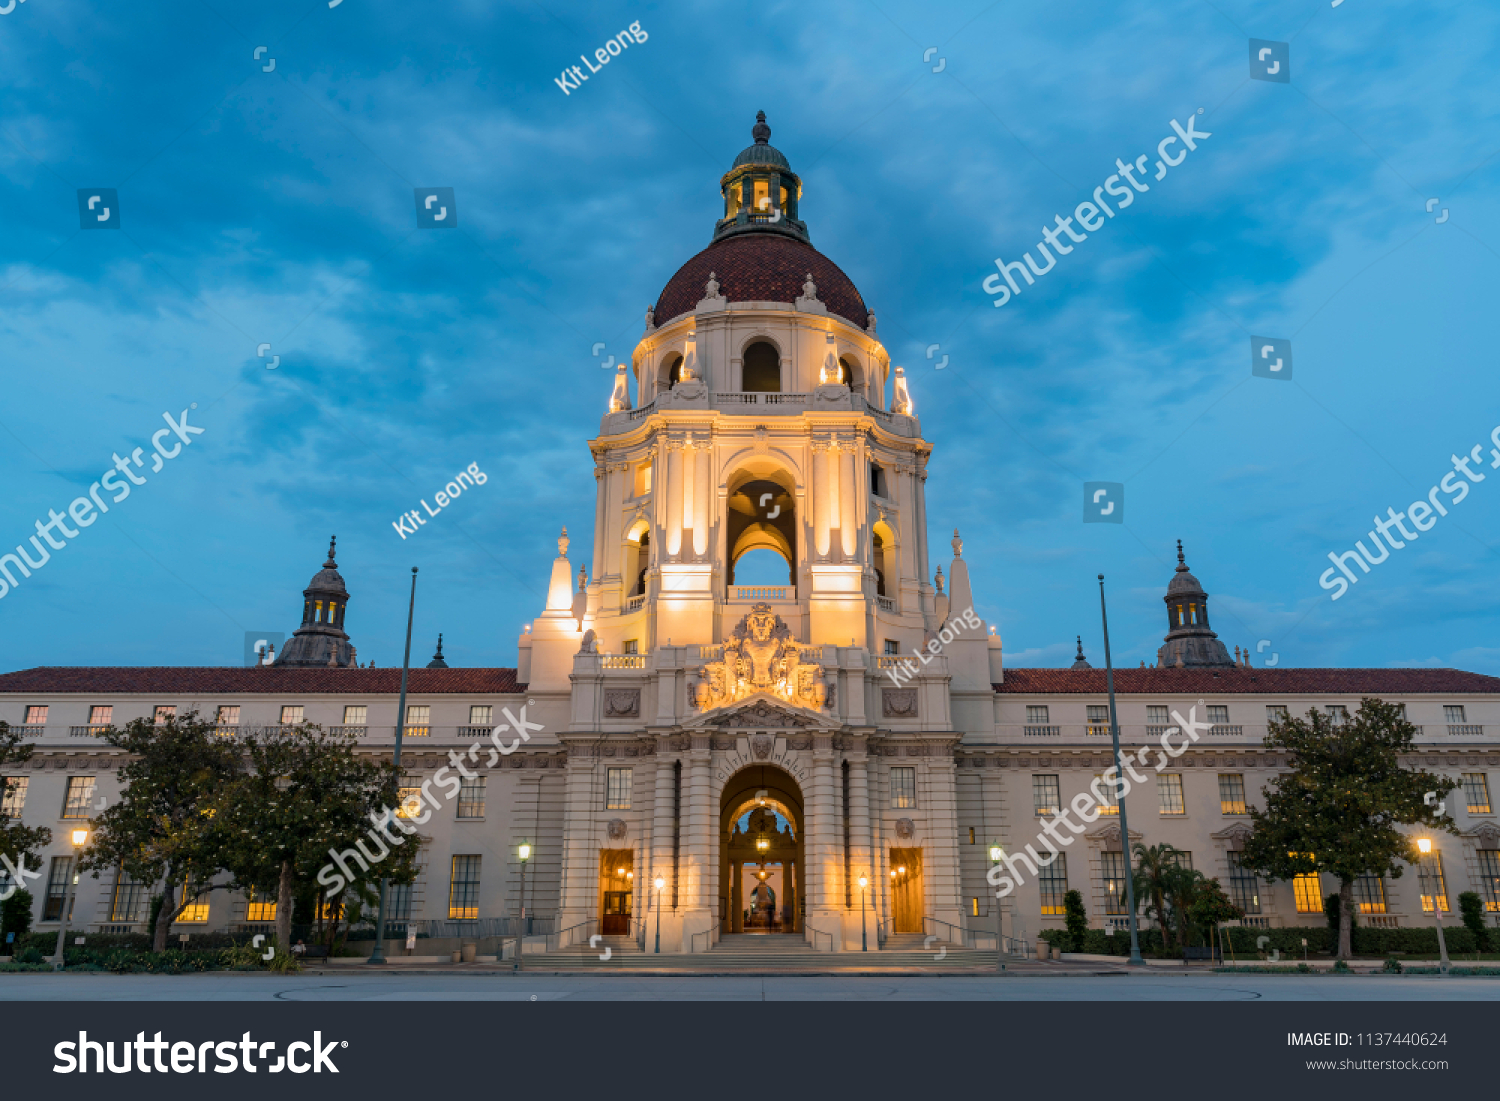 Night view of the famous Pasadena City Hall at Los Angeles County, California #1137440624